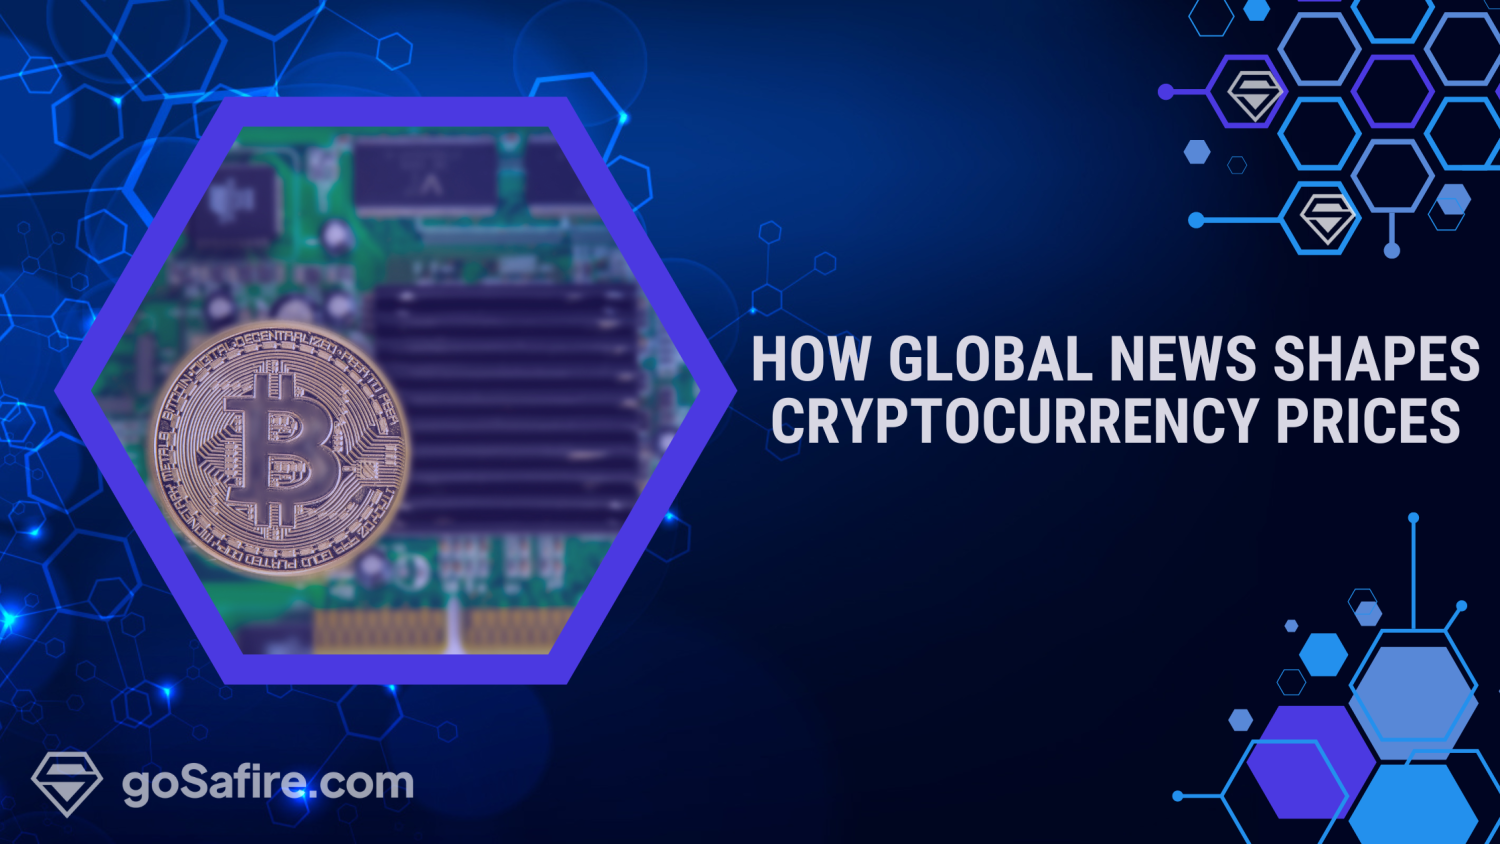 Understanding the Impact of Global News on Cryptocurrency Prices